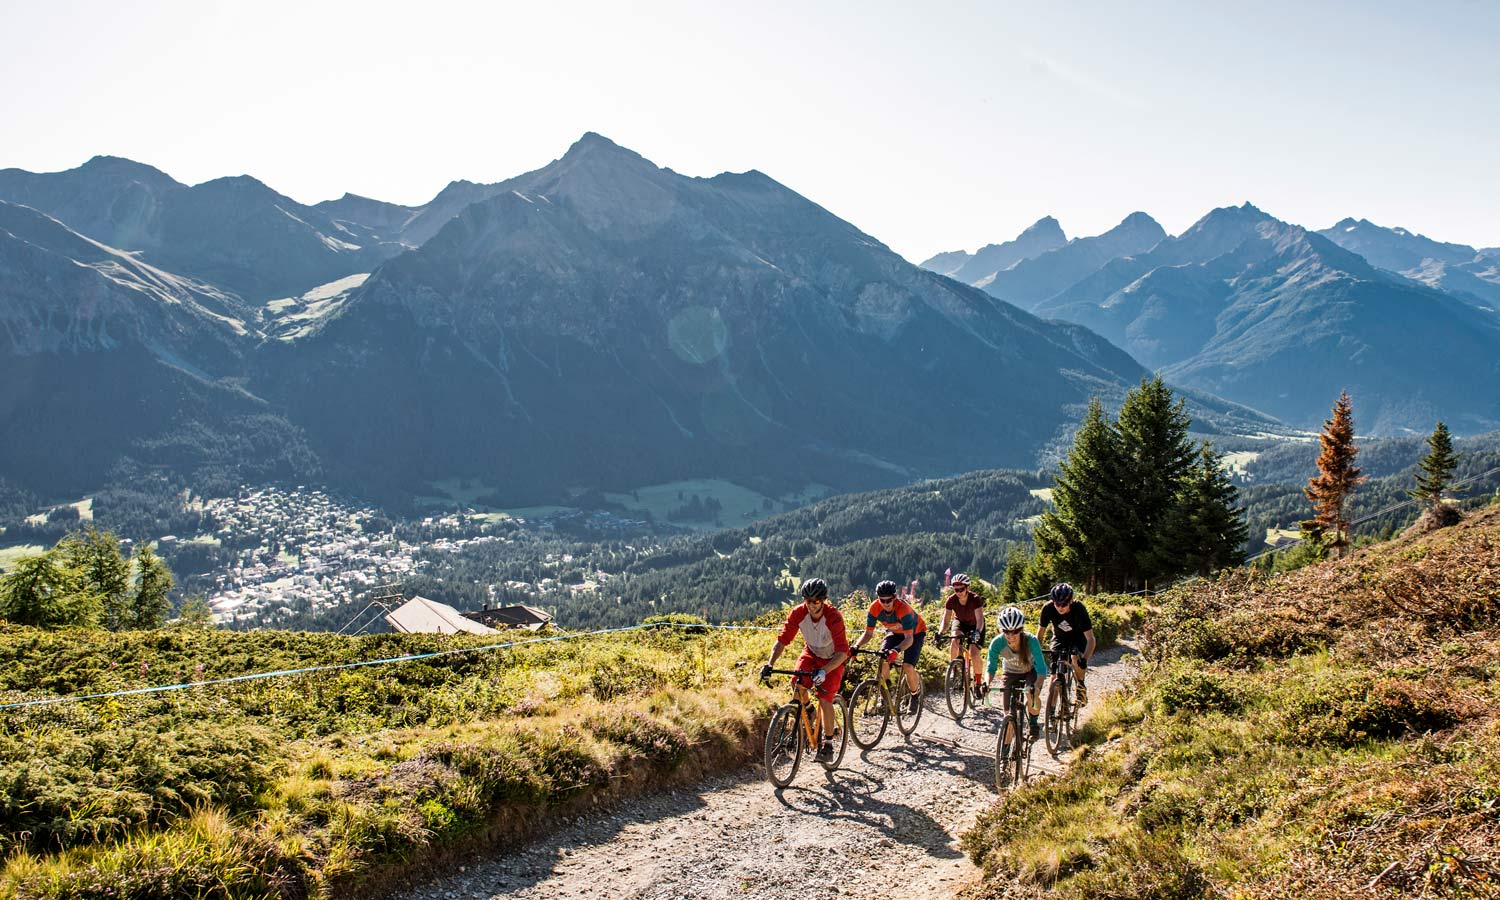 Grinduro 2020, gravel bike gravel grinding gran fondo enduro race expands to 6 countries 4 continents 5 new race venues